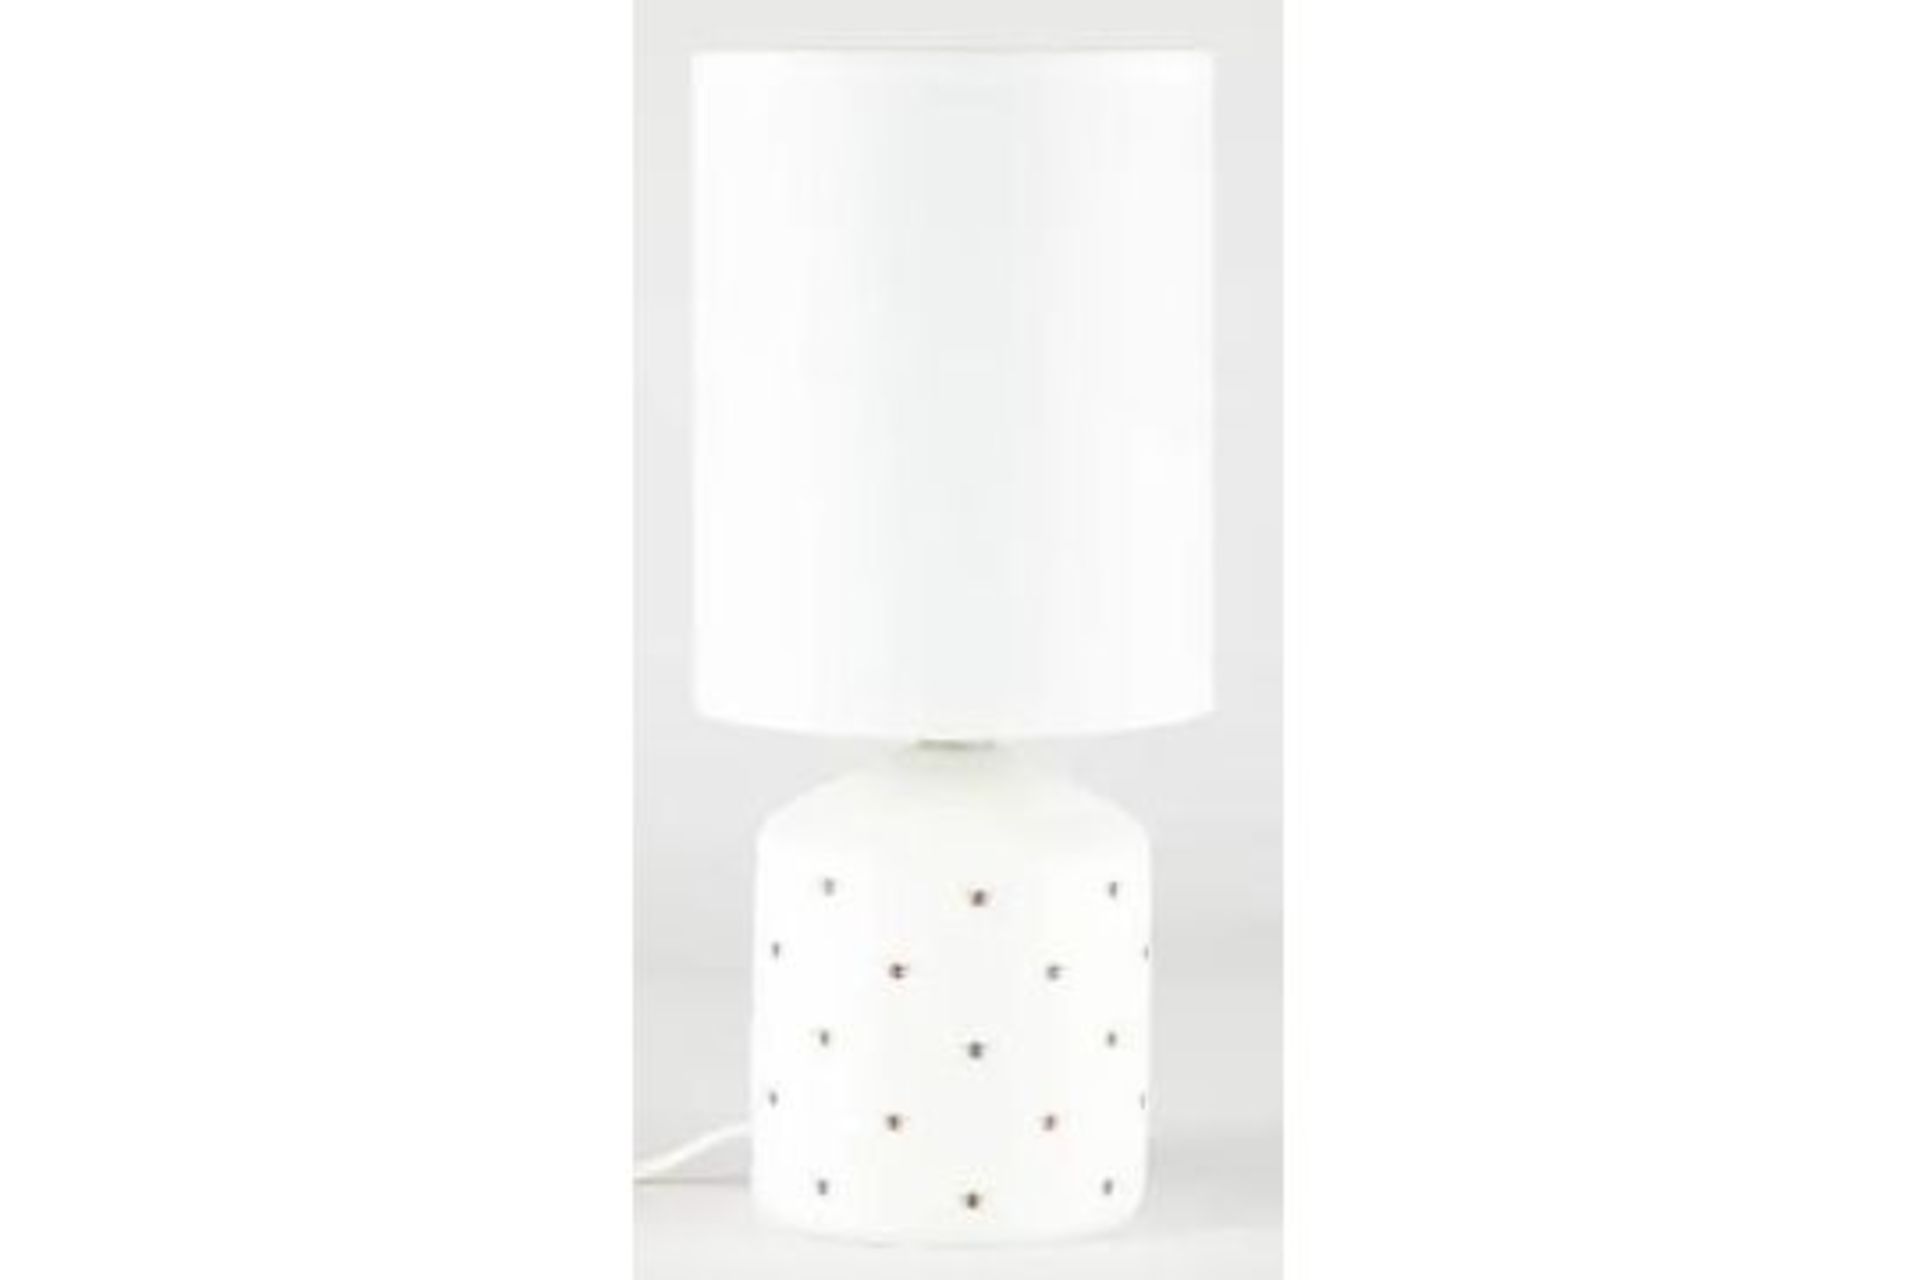 TRADE LOT 12 X NEW BOXED White Bumblebee Table Lamp (50848751). Coming with a white shade and a